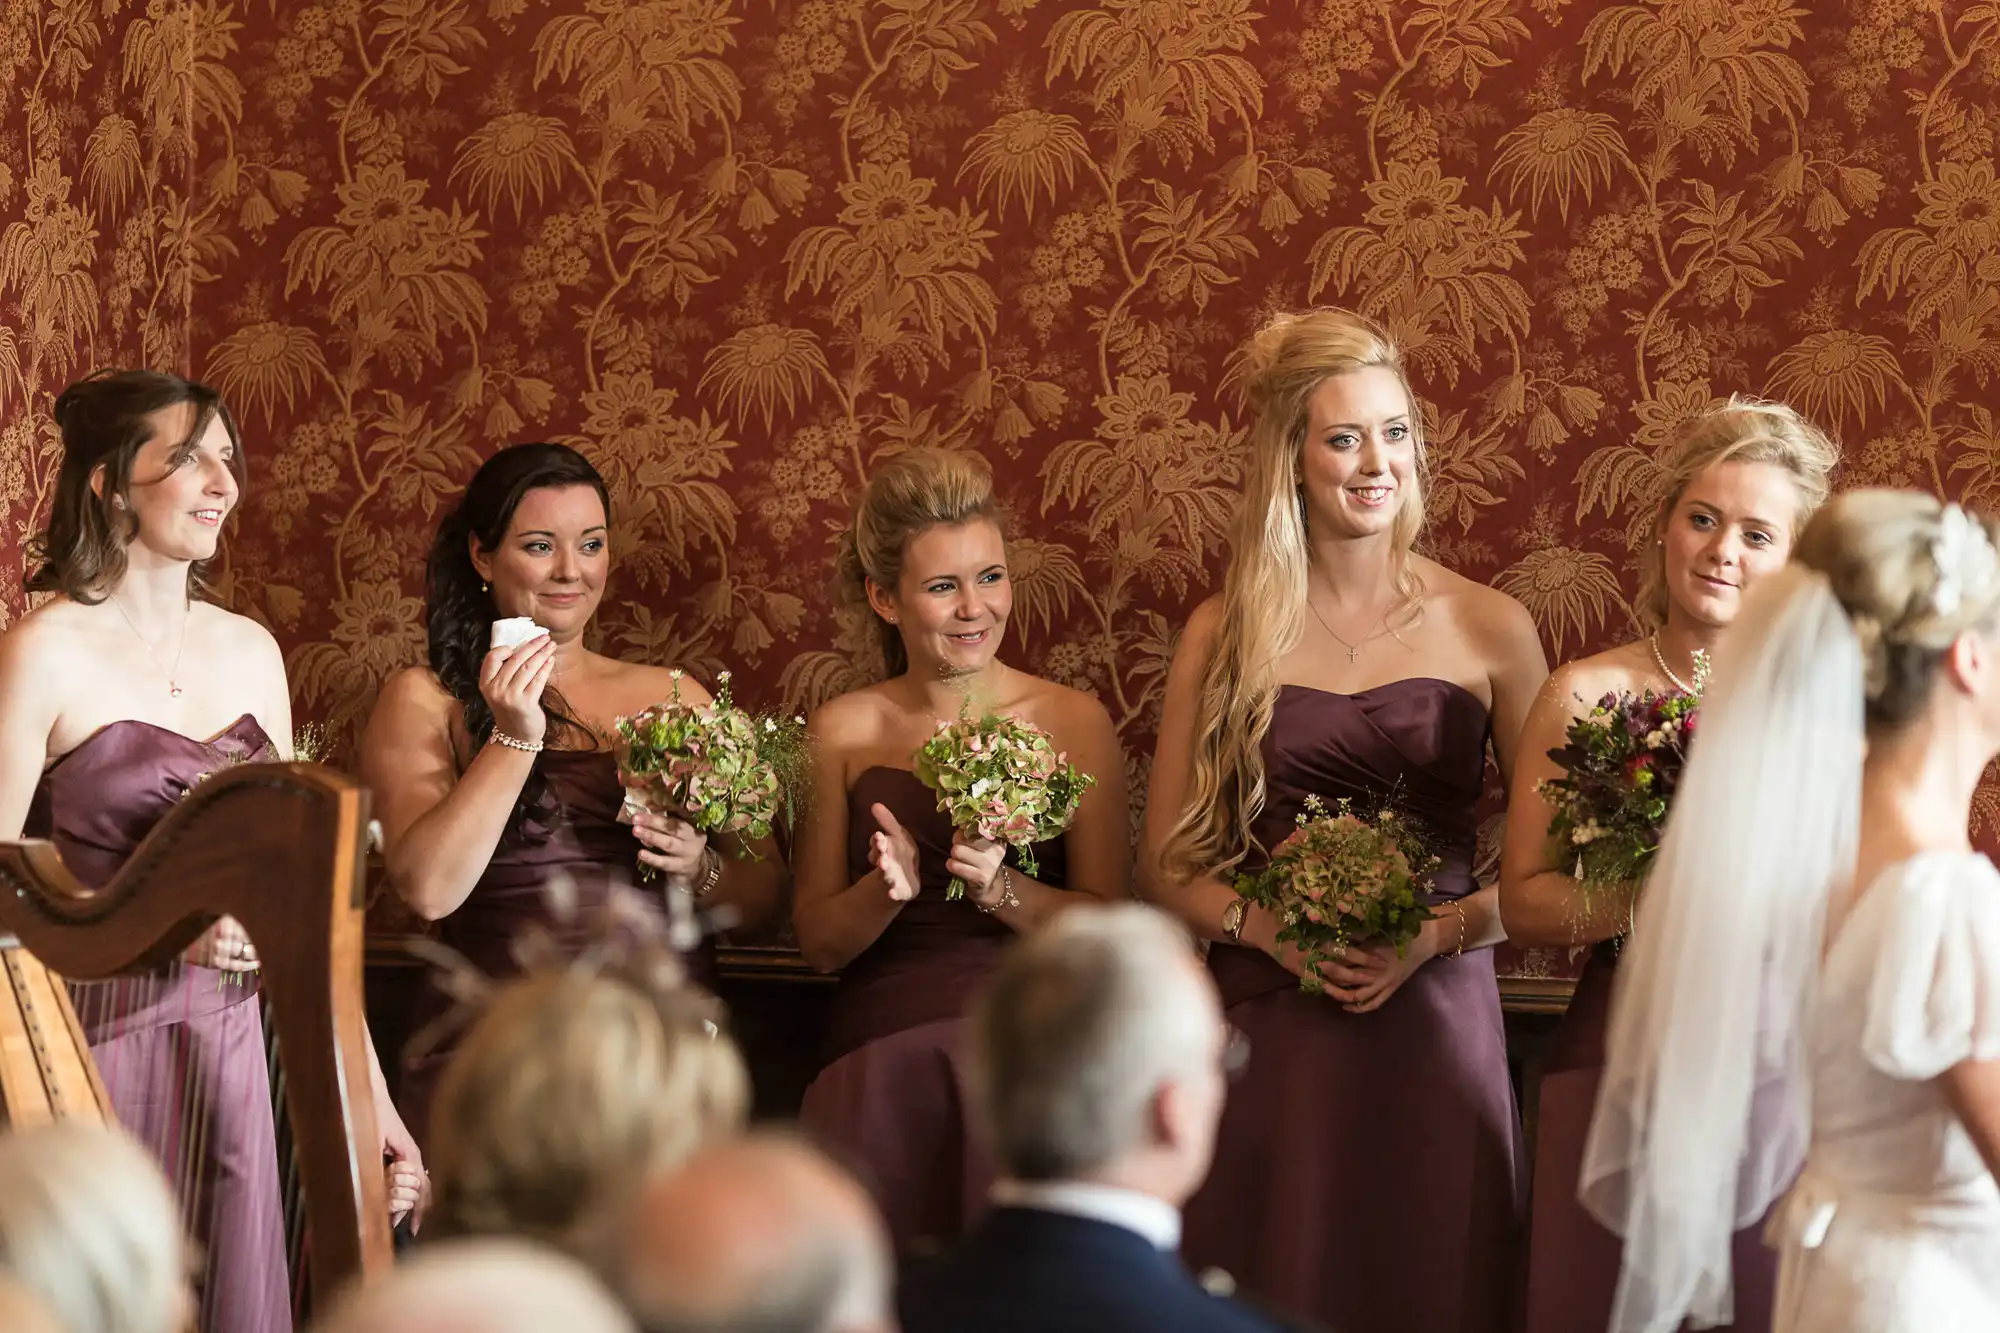 Bridesmaids in plum dresses holding bouquets, watching a bride approach in a ceremony room with ornate golden wallpaper.